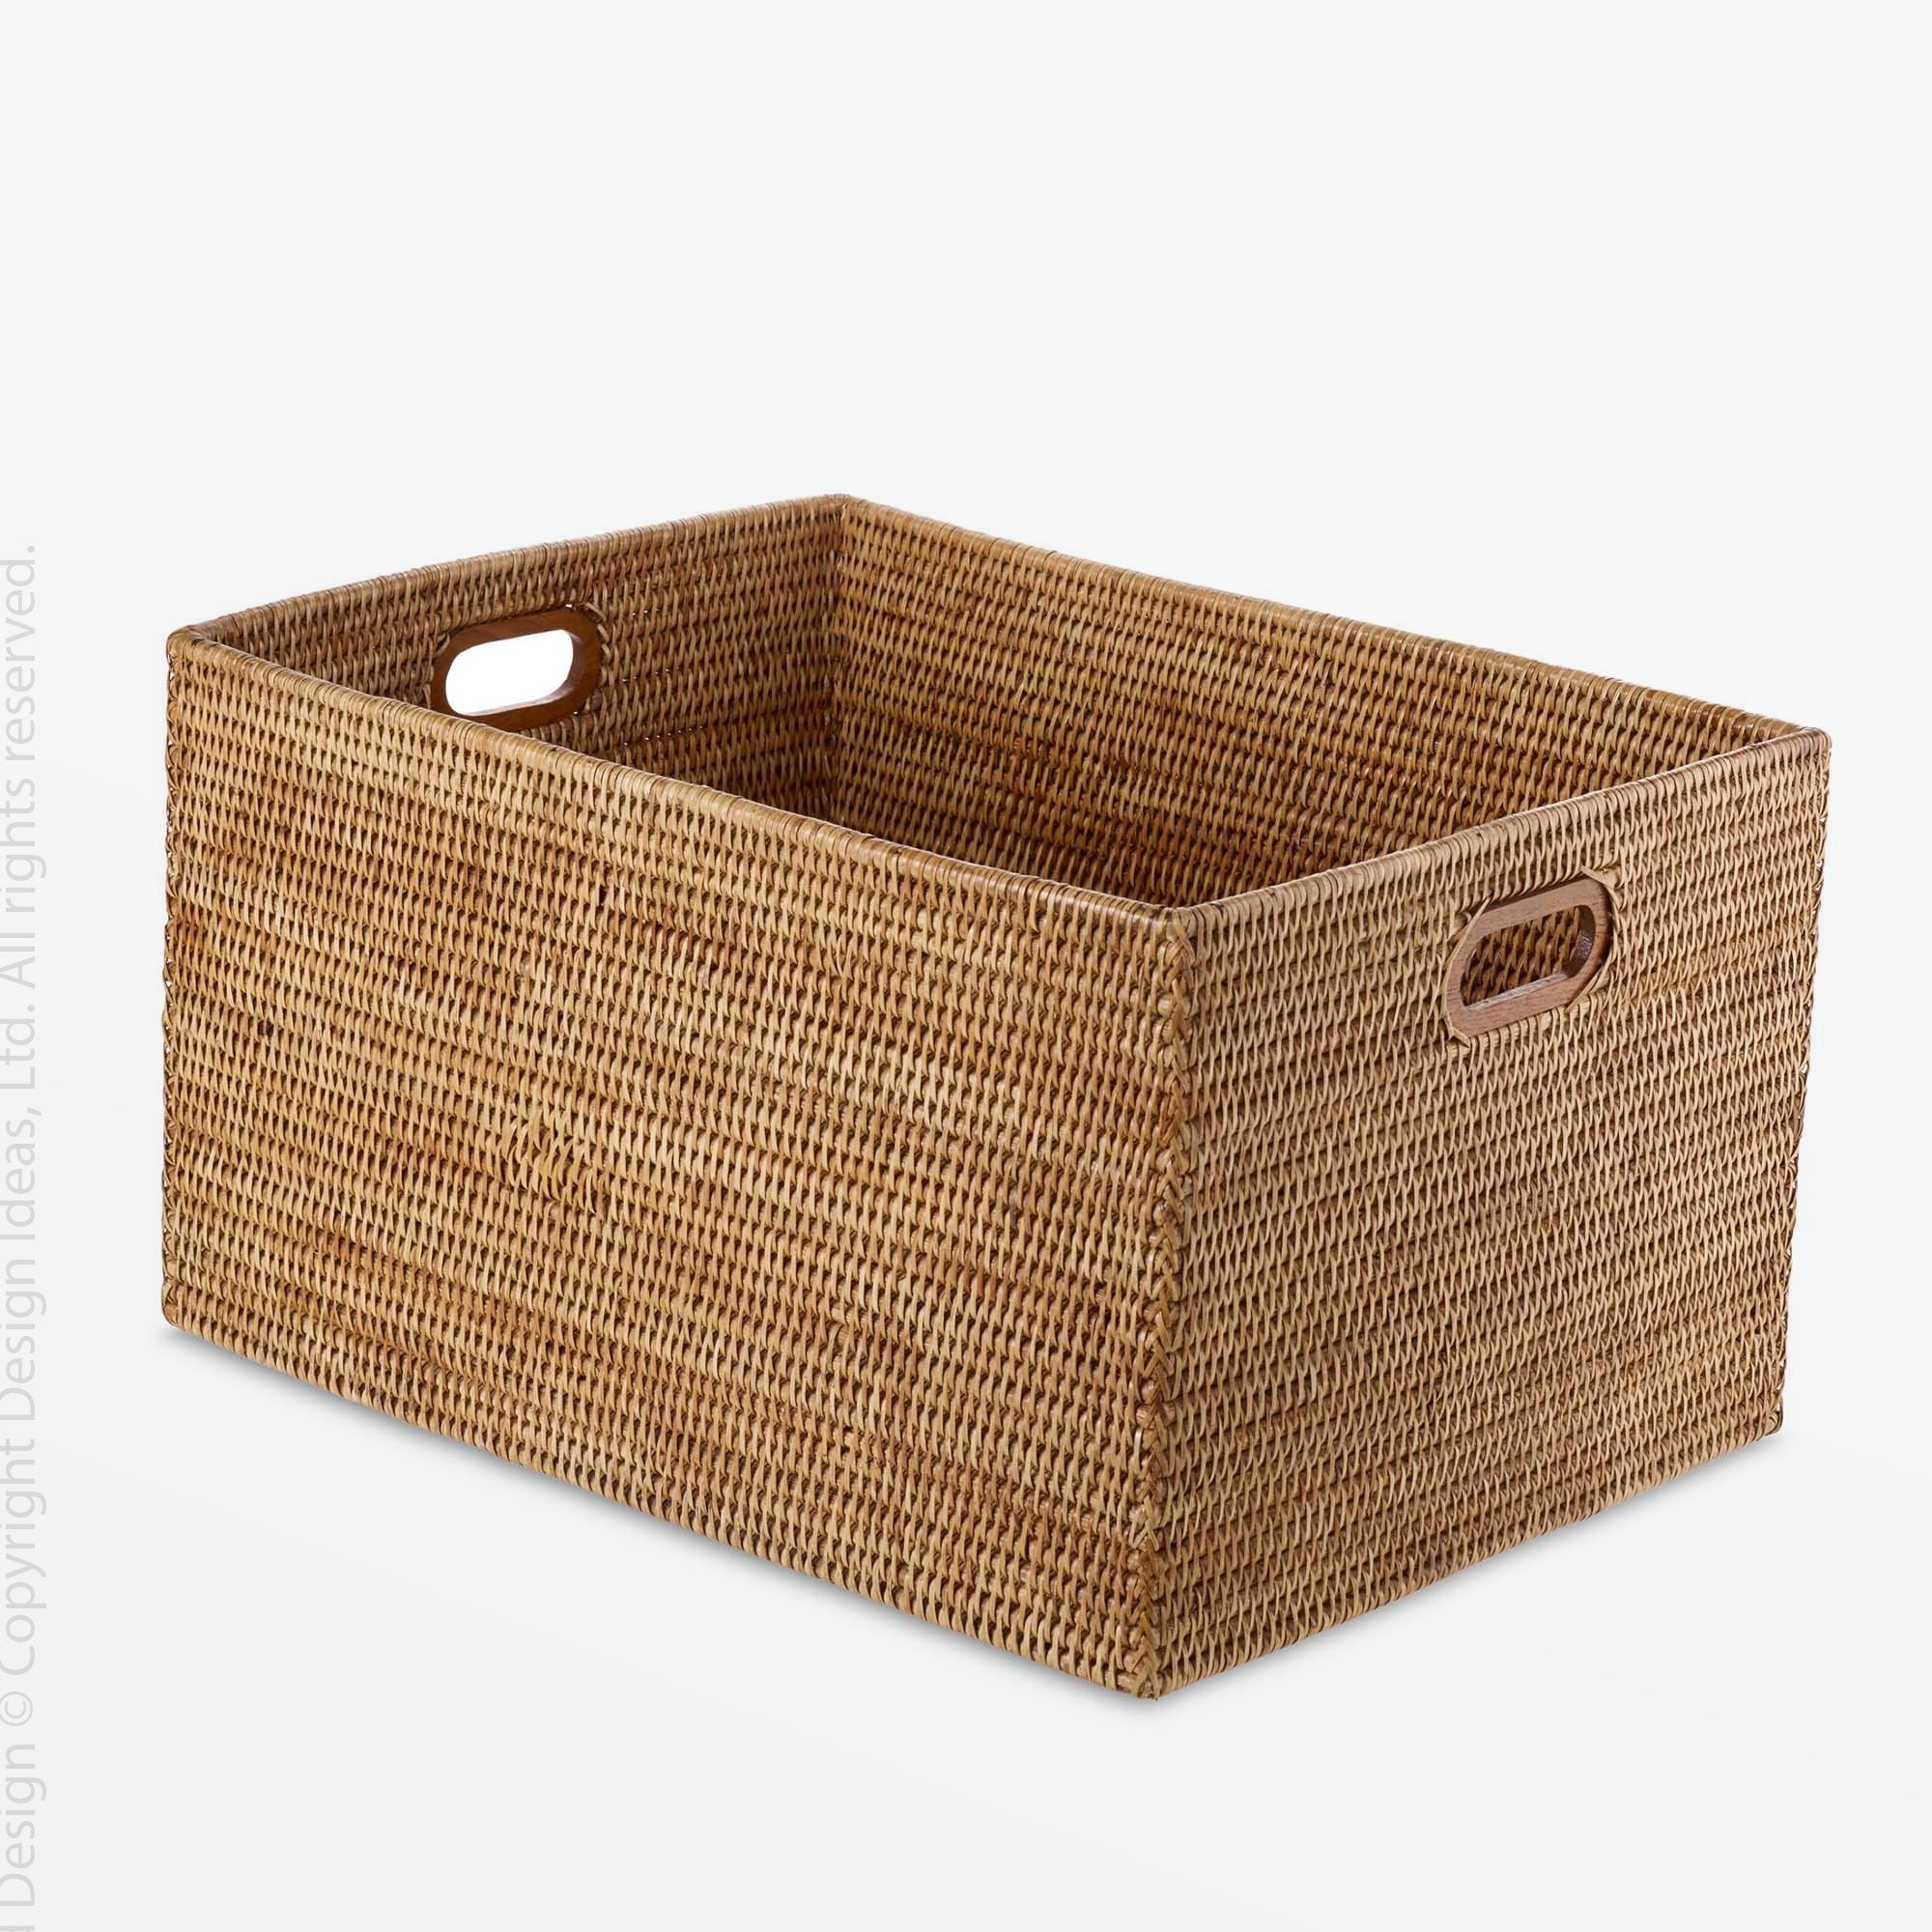 Liana Rattan Basket - Golden Color | Image 1 | From the Liana Collection | Masterfully crafted with natural rattan for long lasting use | texxture home